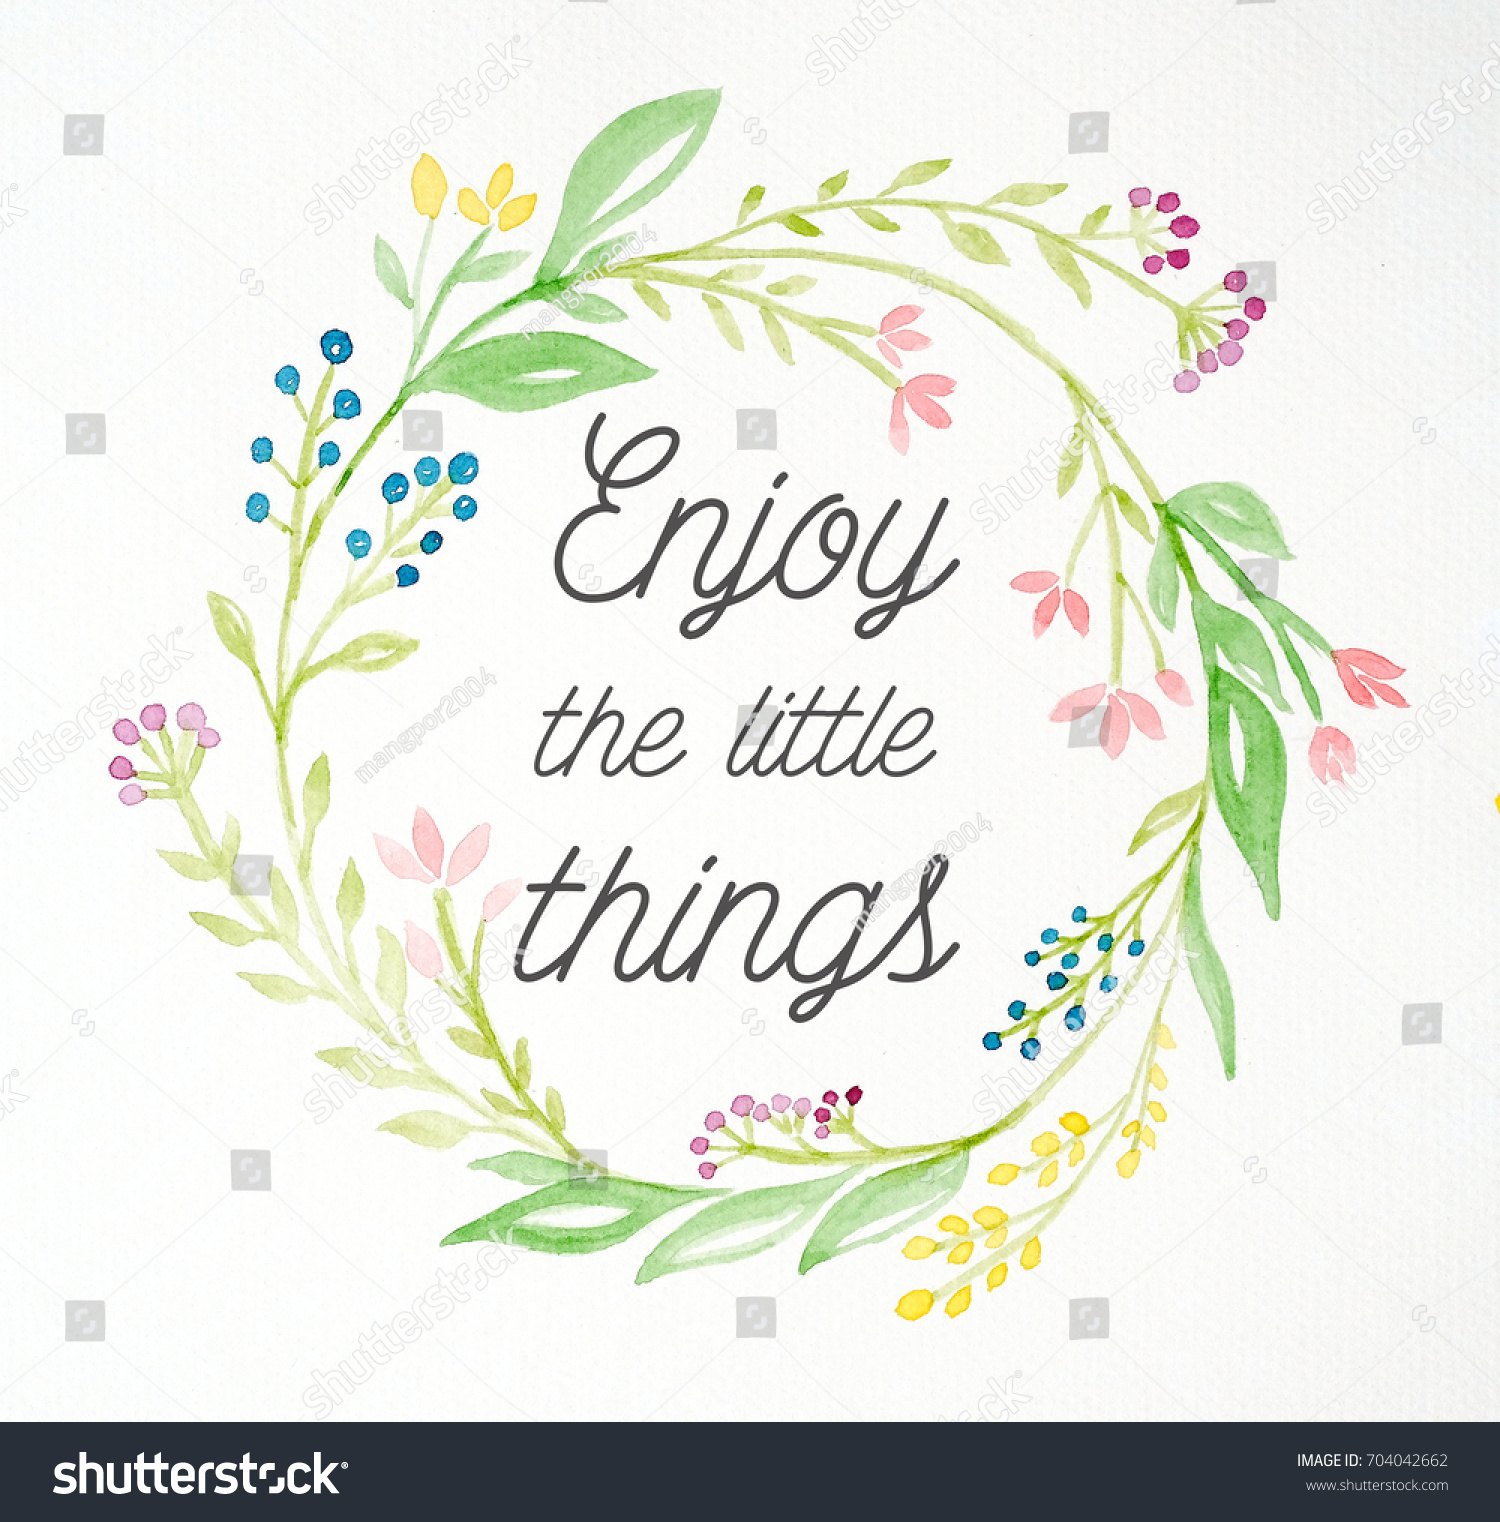 enjoy the good things in life quotes enjoy little things quotation on flowers stock illustration